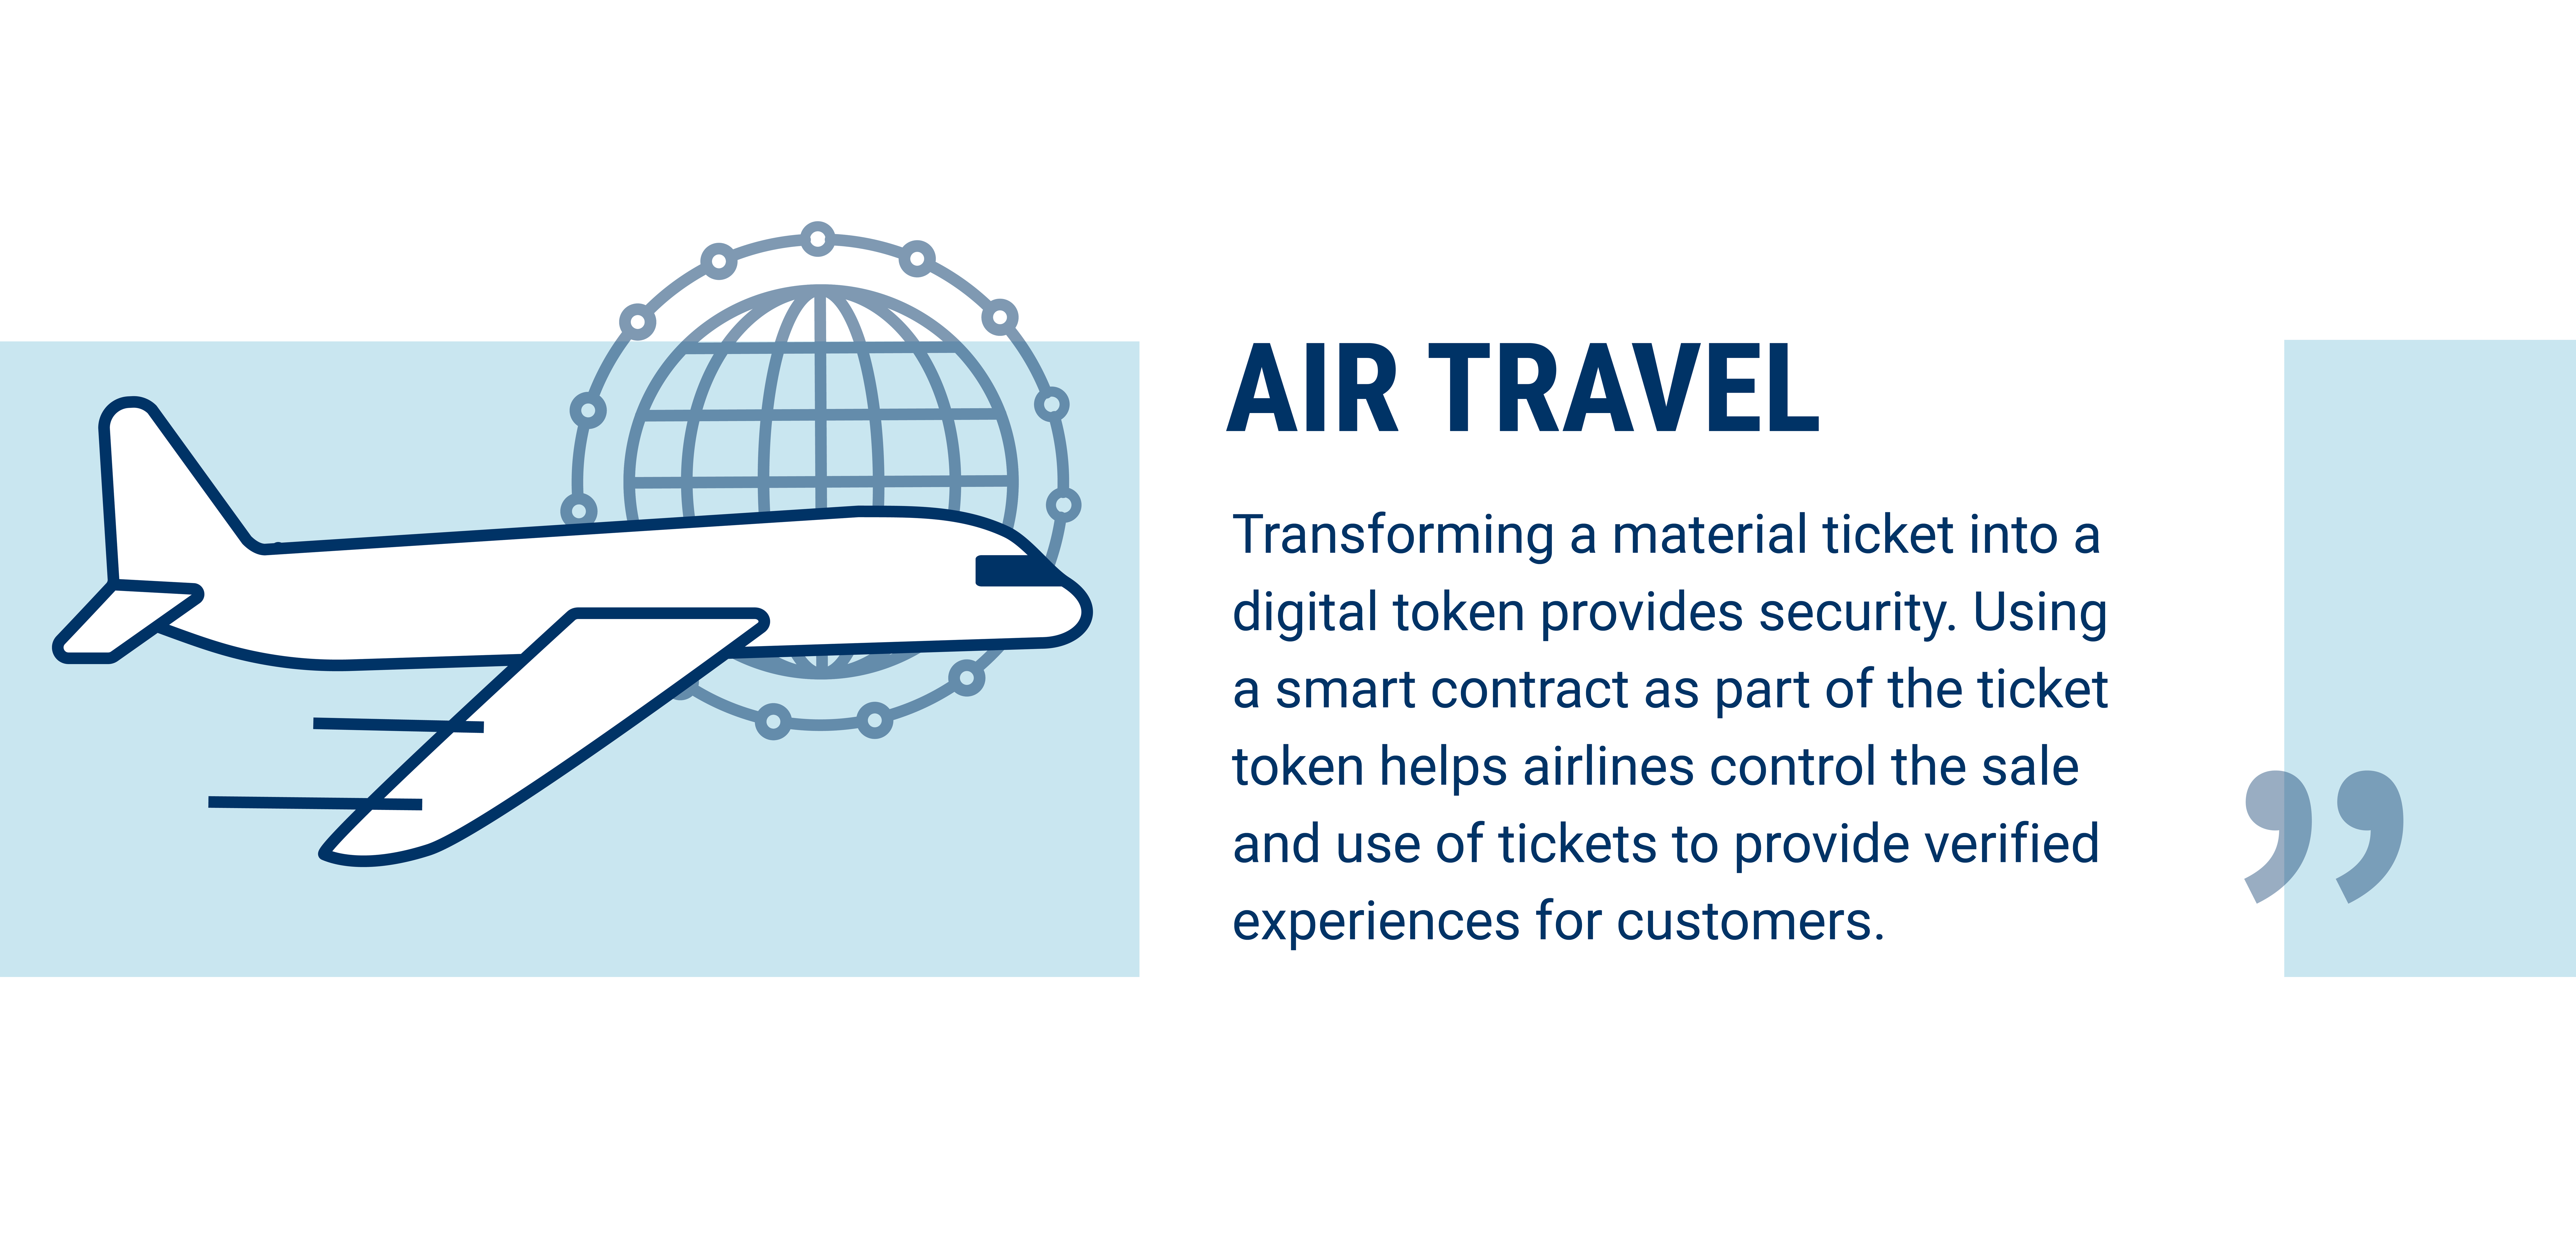 Air travel is being disrupted by blockchain technology